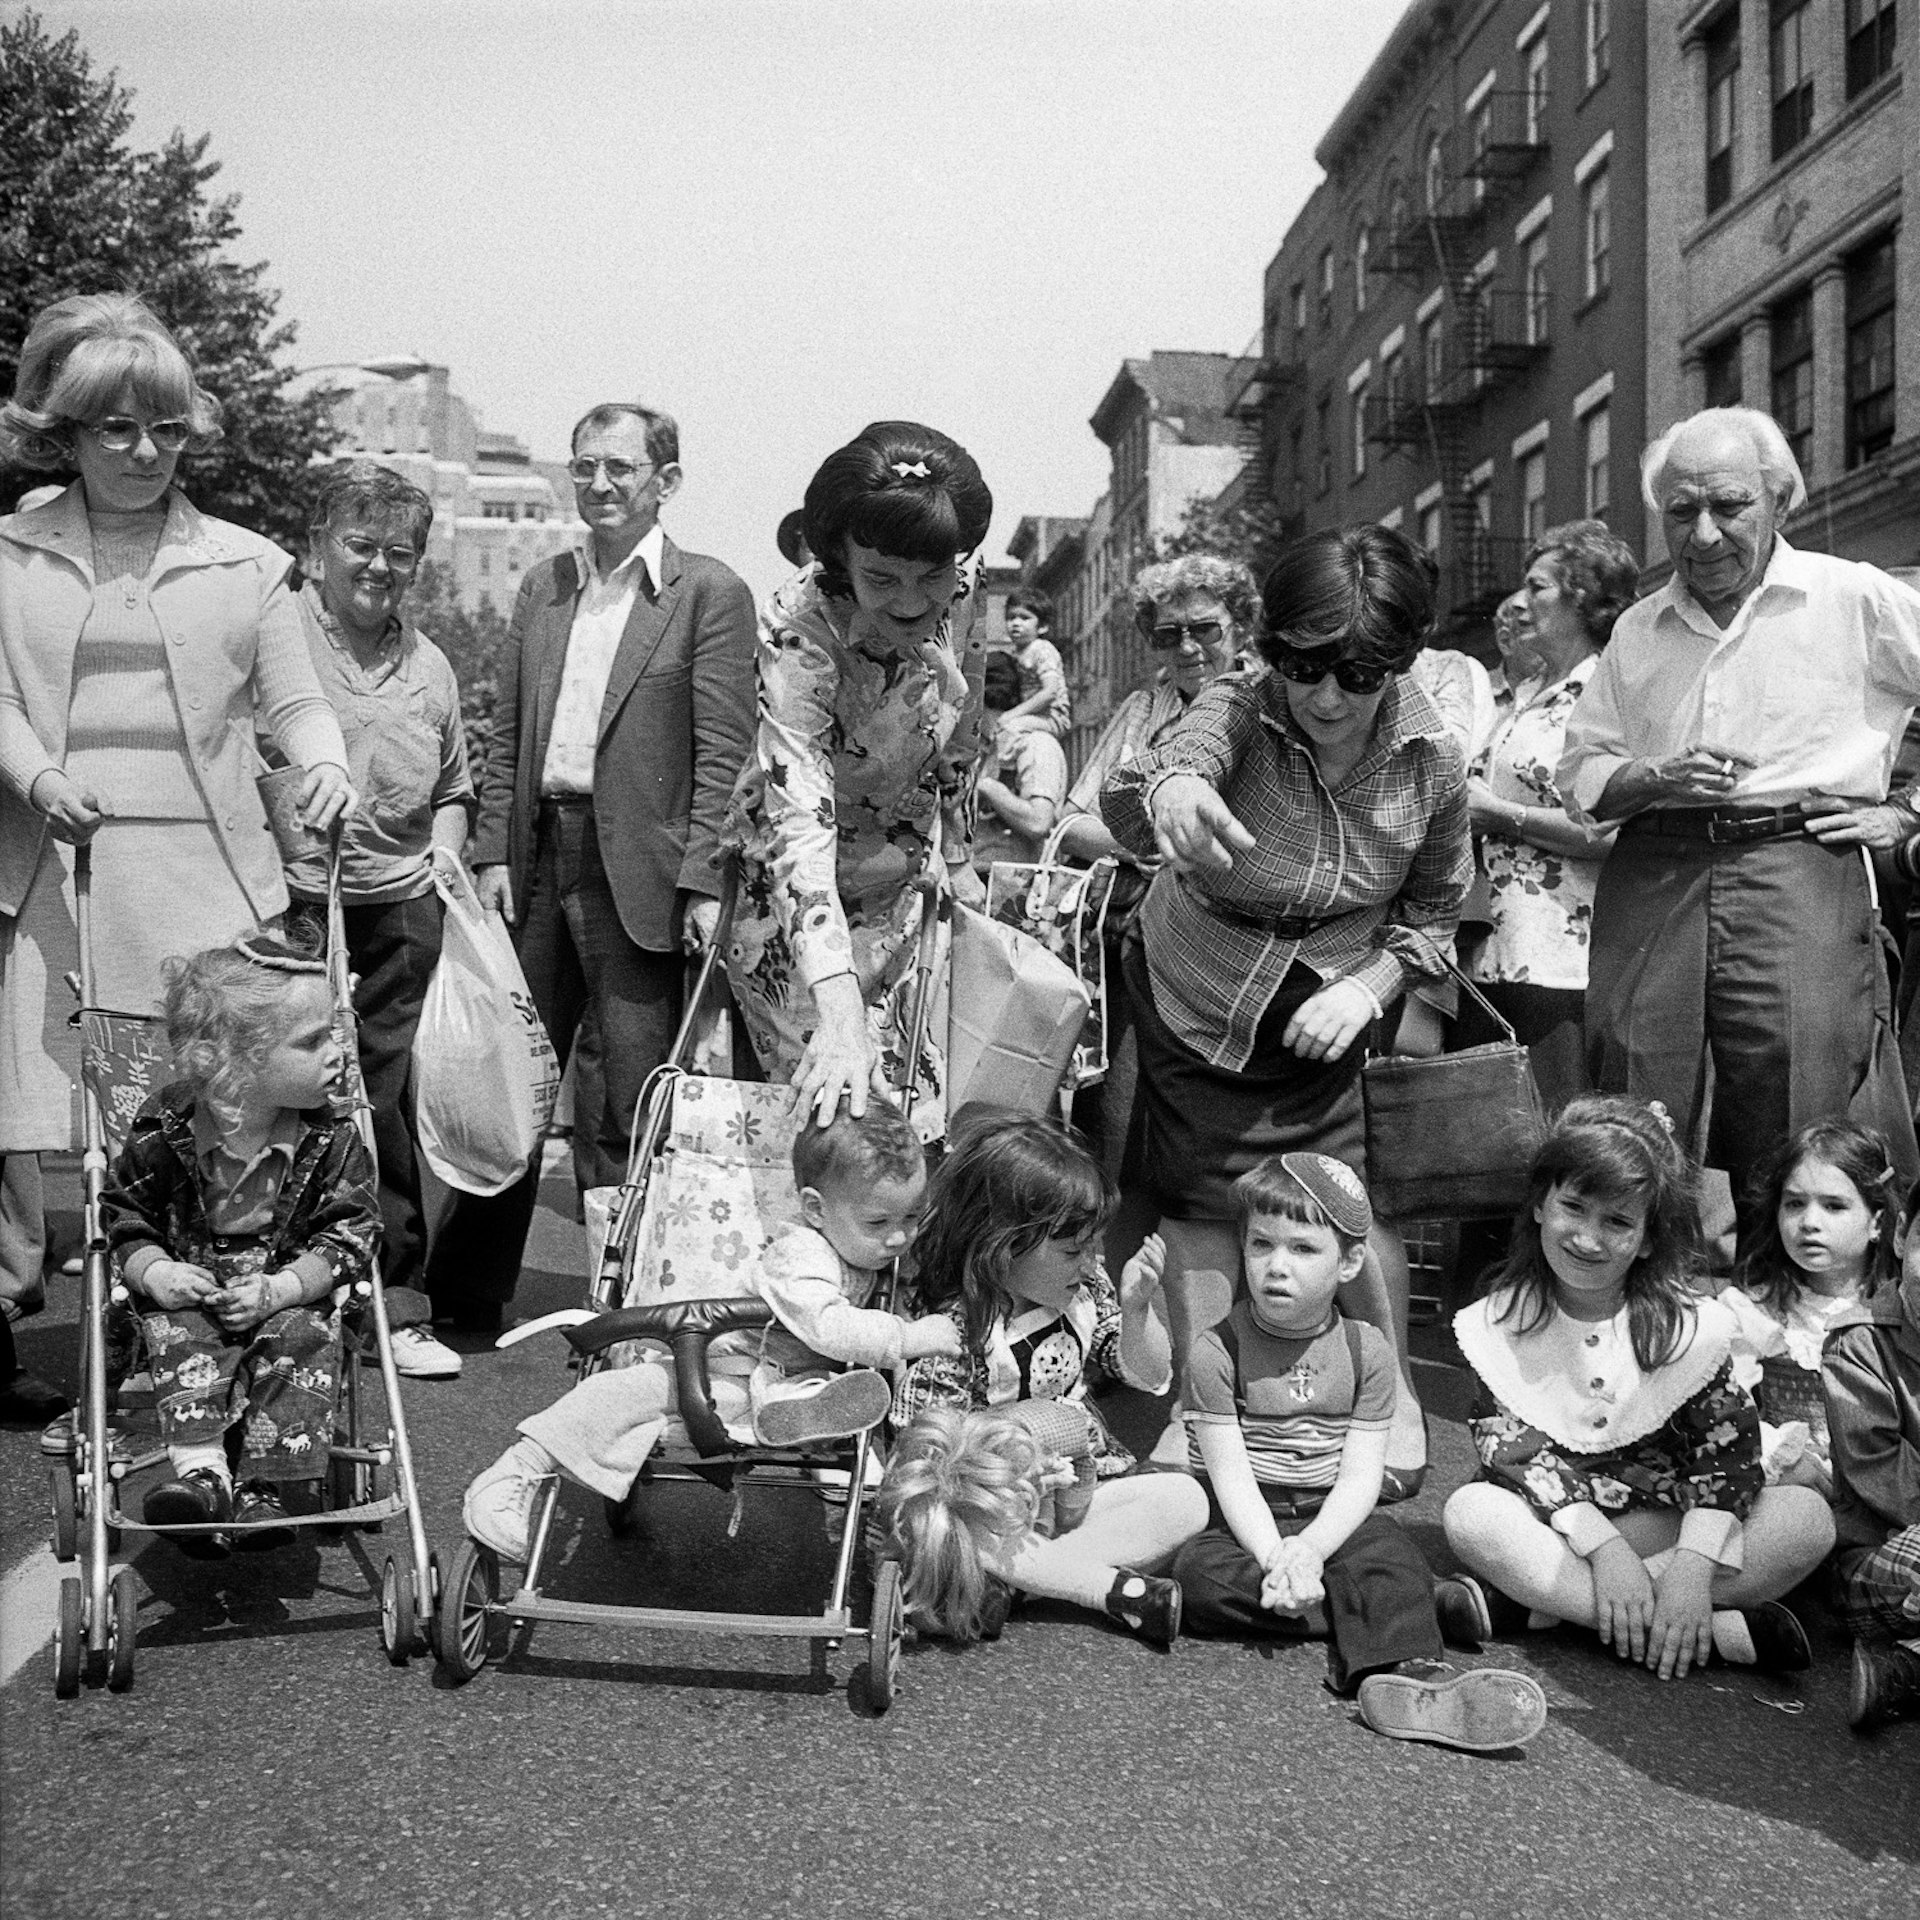 Baby carriages, children and adults at the Lower East Side Street Festival NY, NY June 1978